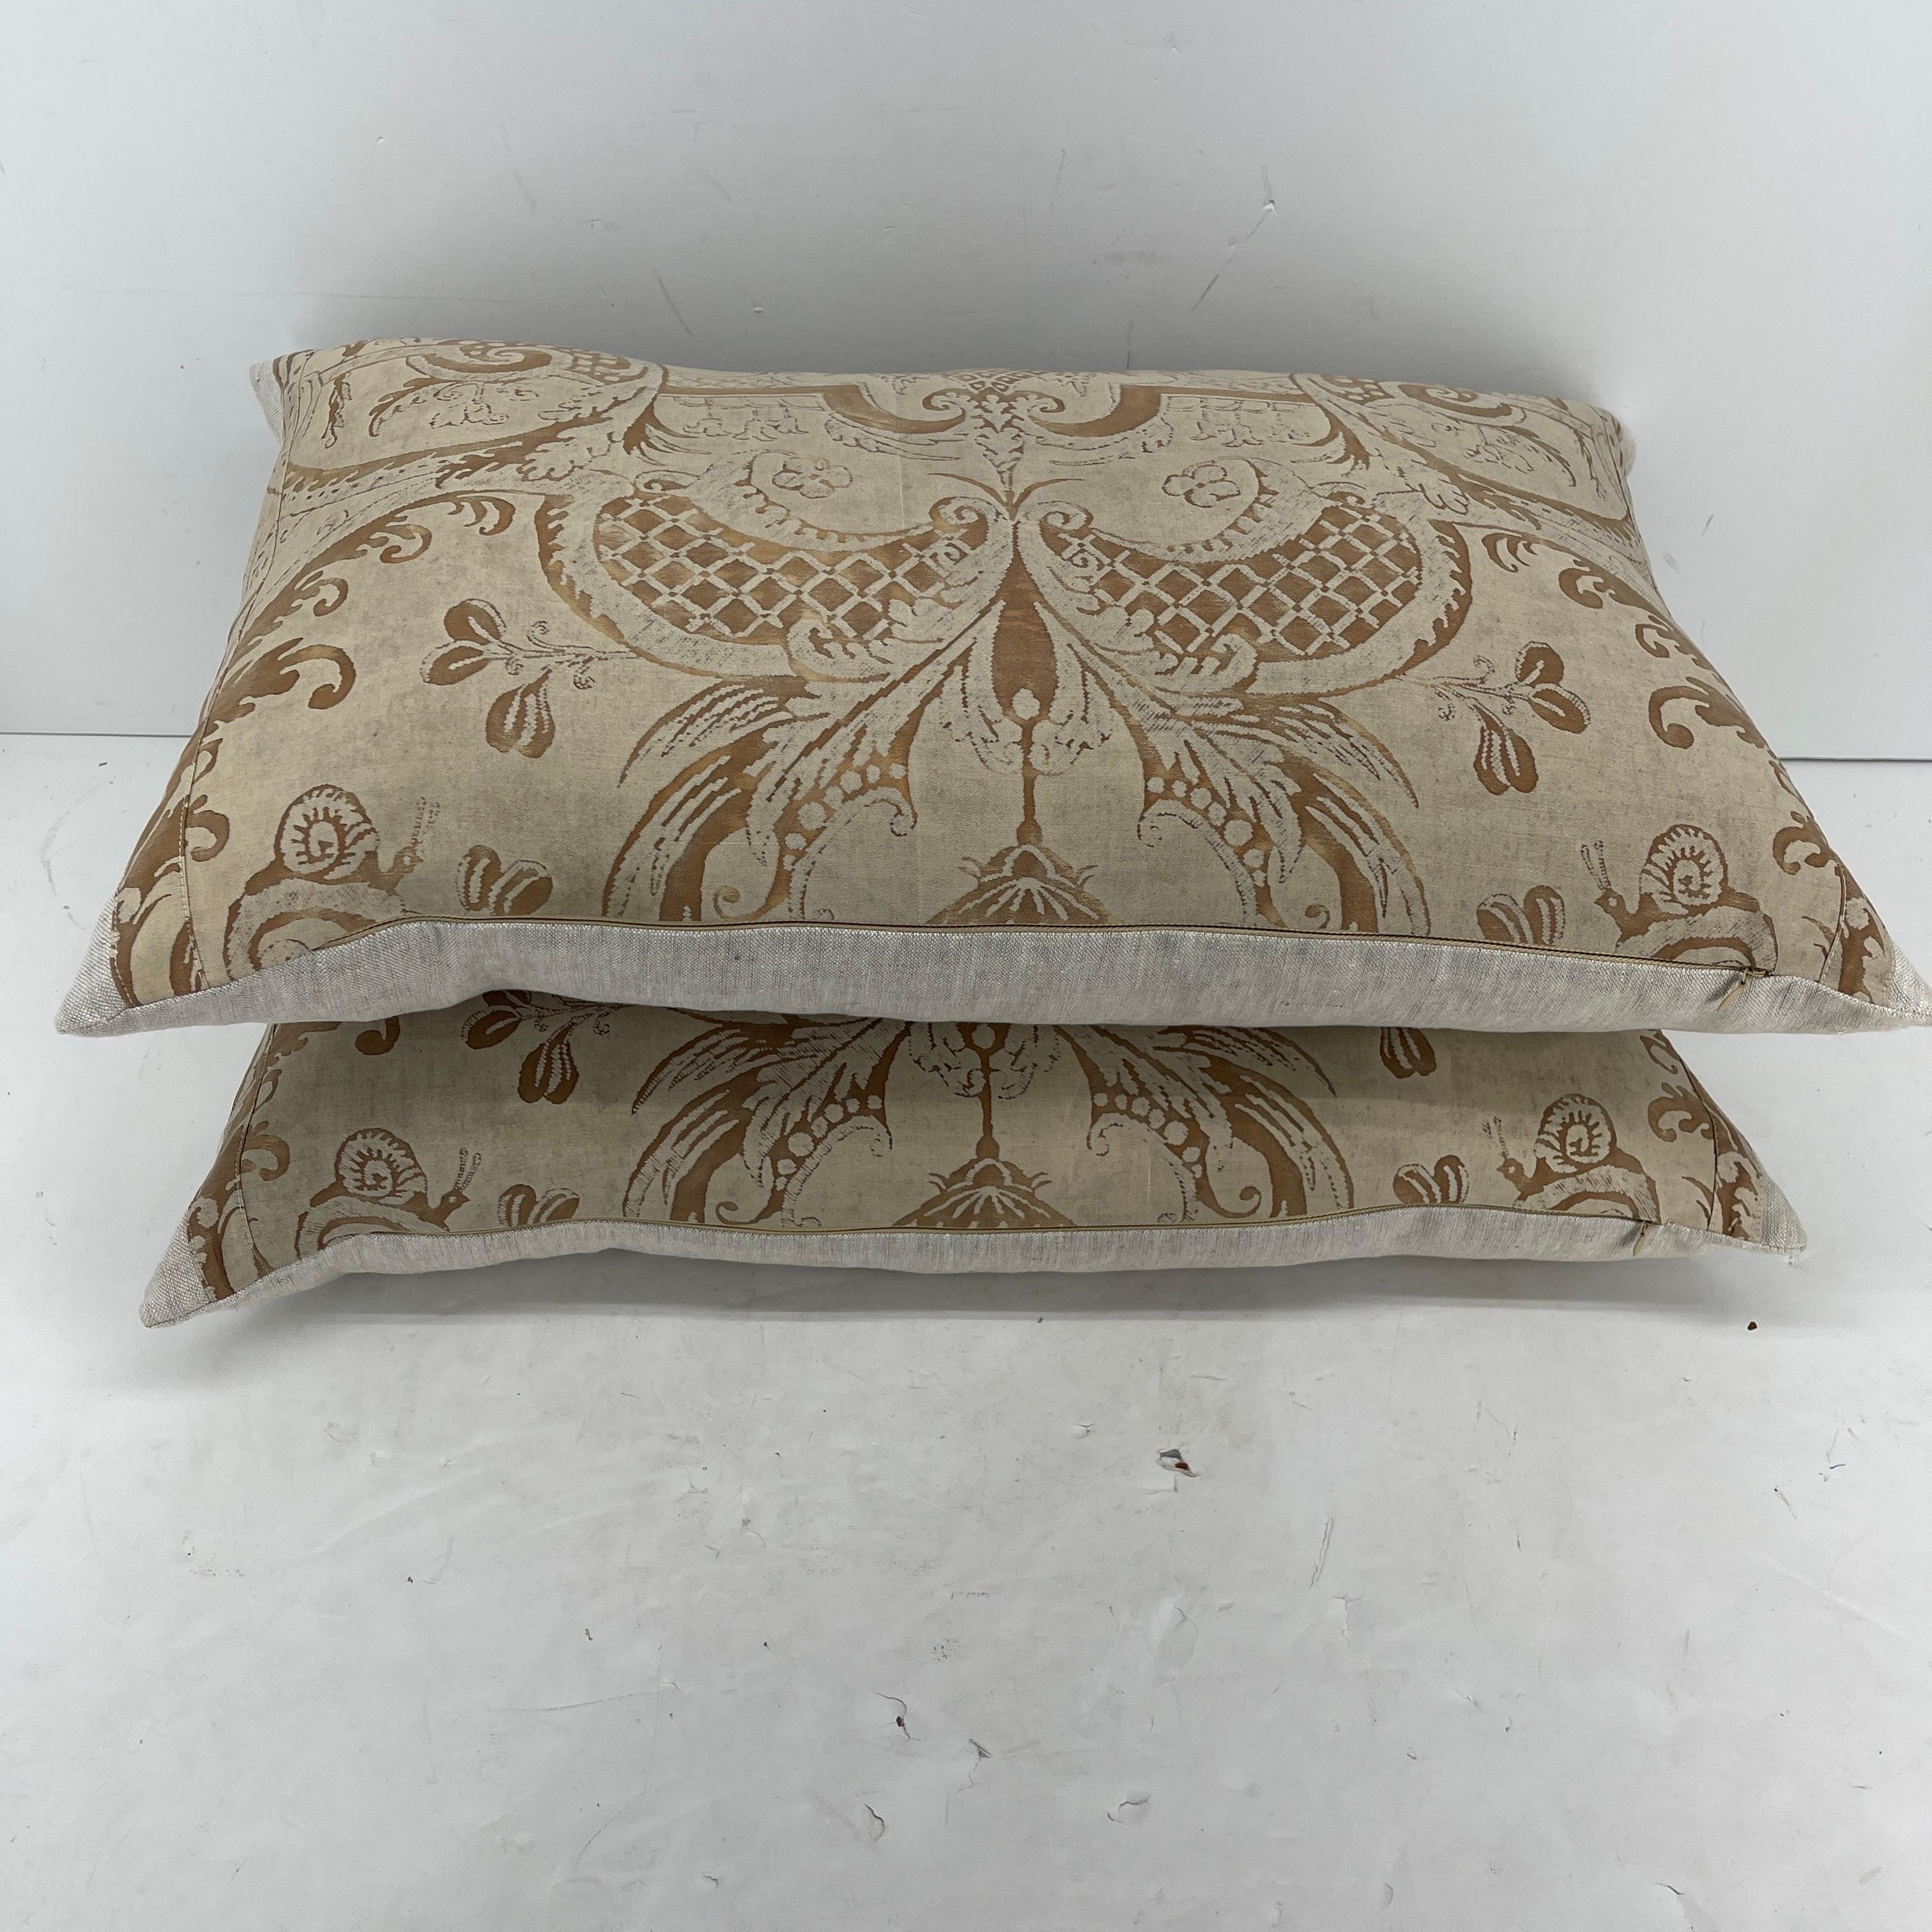 Pair of Vintage Italian Fortuny Fabric Textile Pillows in Royal Gold Pattern For Sale 8